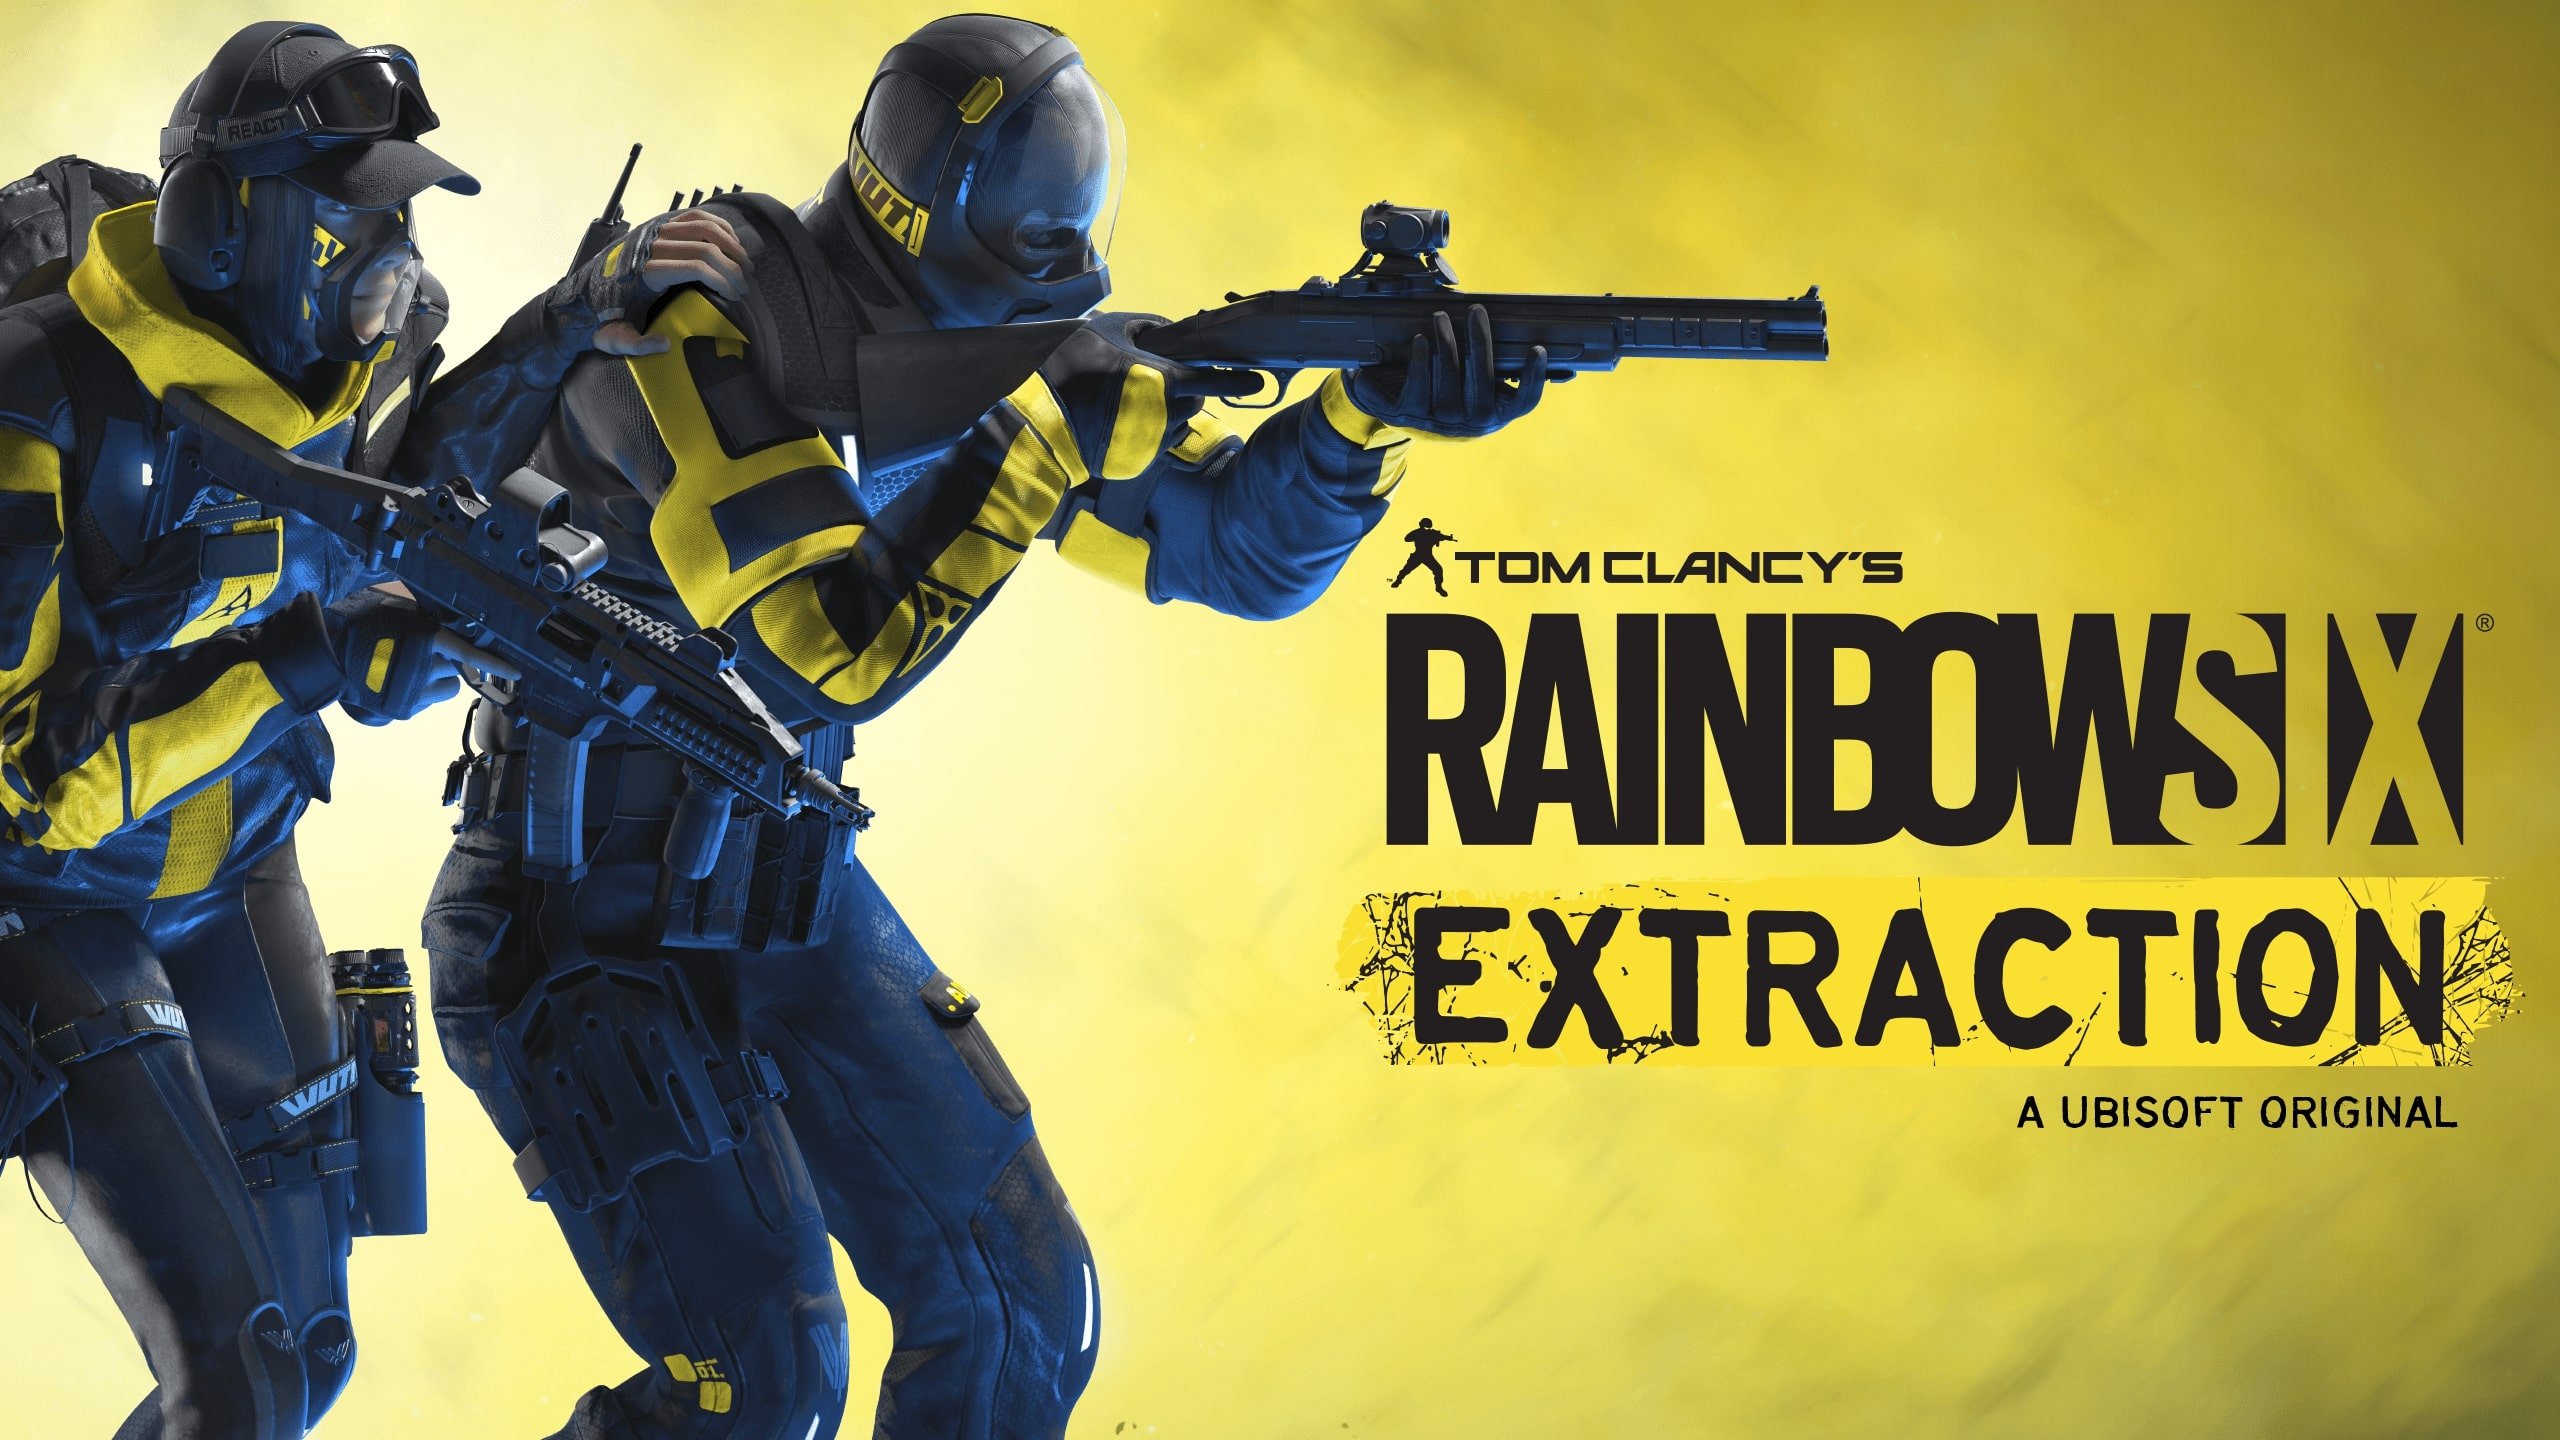 Release date for Rainbow Six Extraction is January